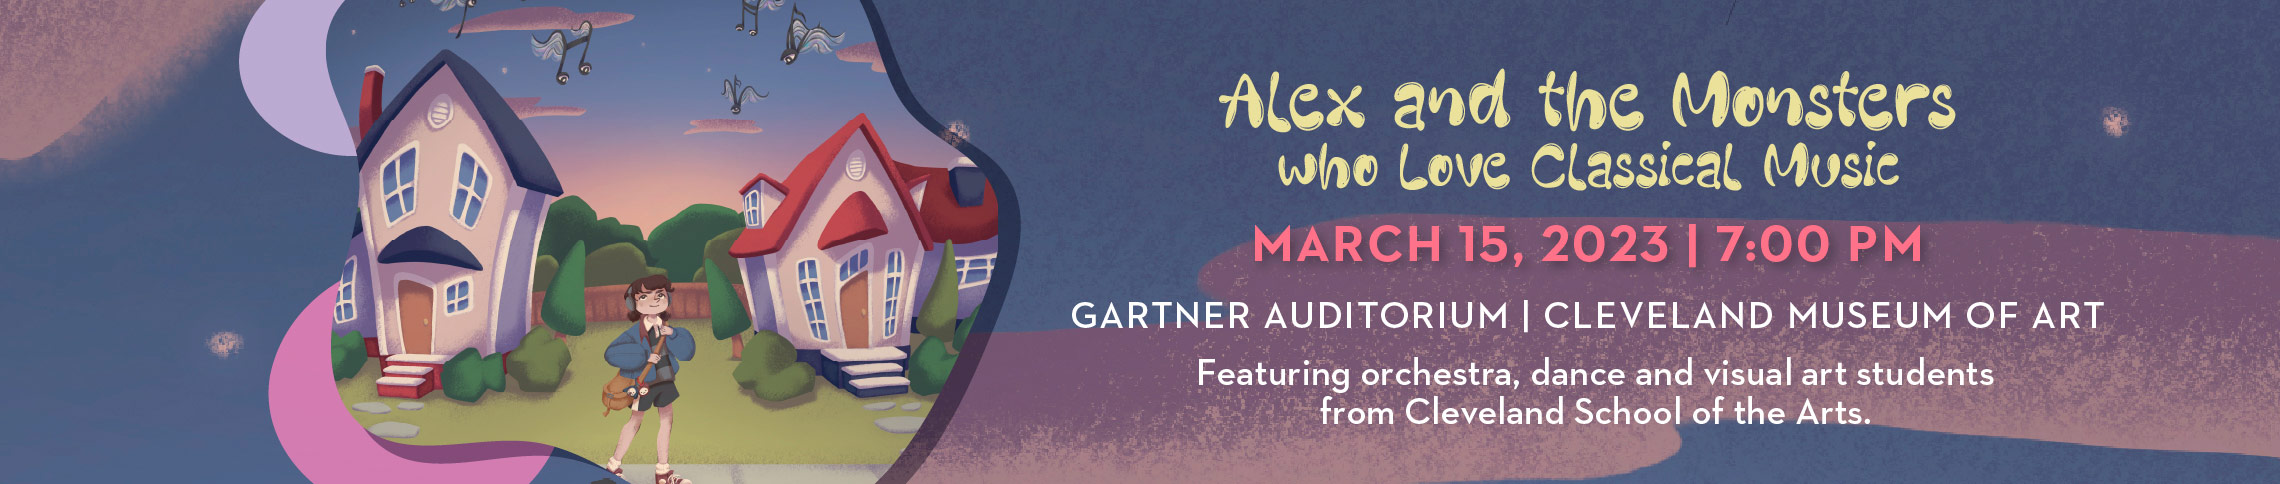 Alex and the Monsters Who Love Classical Music | Wednesday, March 15, 2023 at 7:00PM | Gartner Auditorium, Cleveland Museum of Art